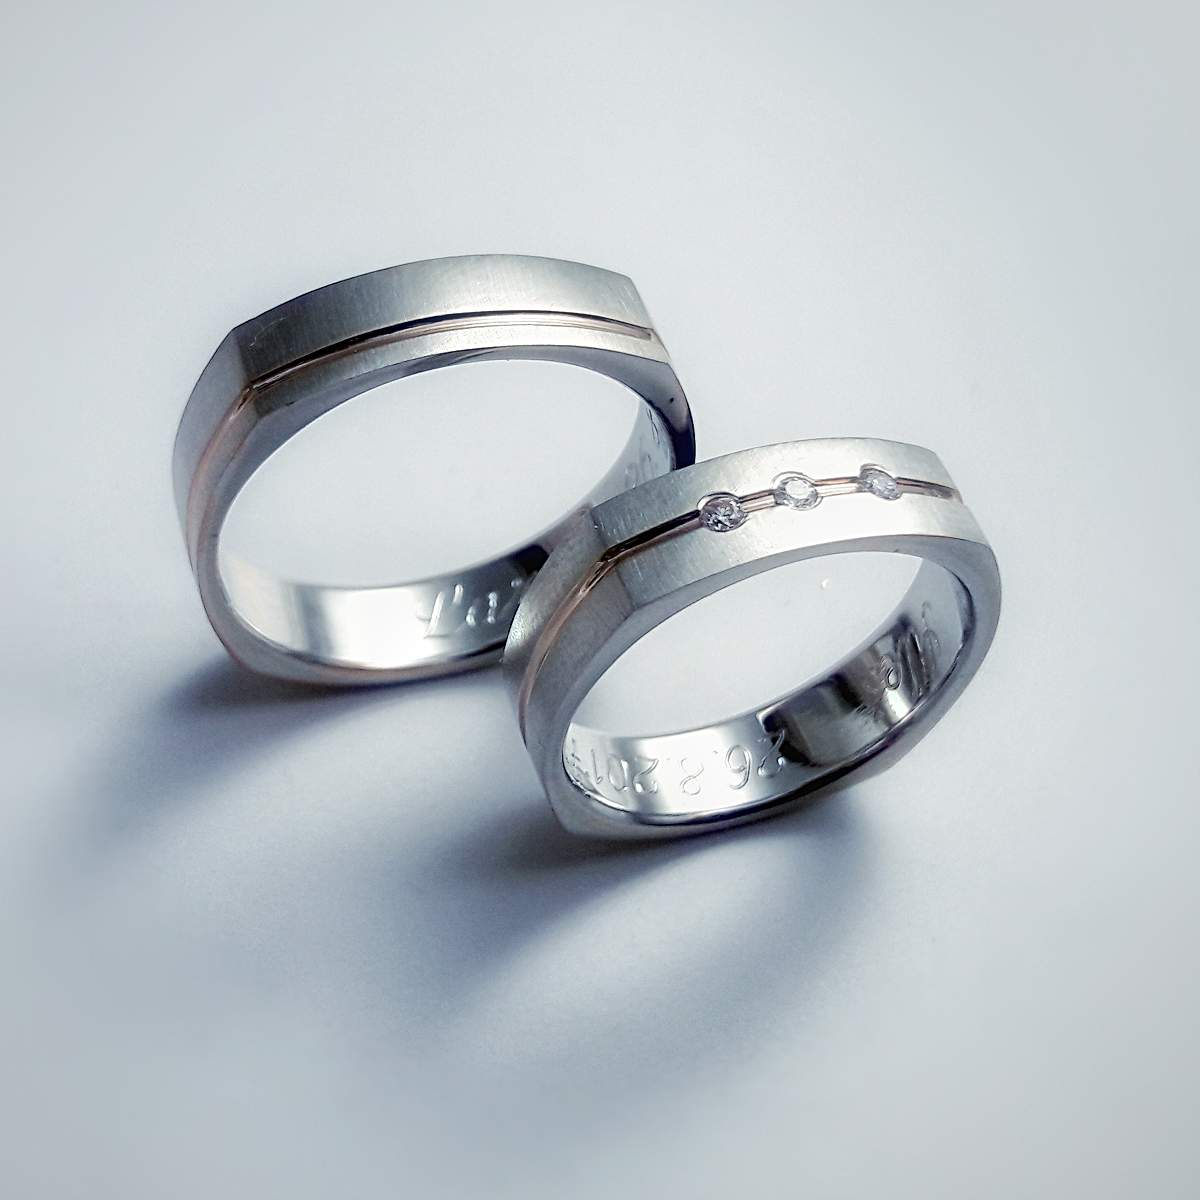 Wedding rings with groove and diamonds